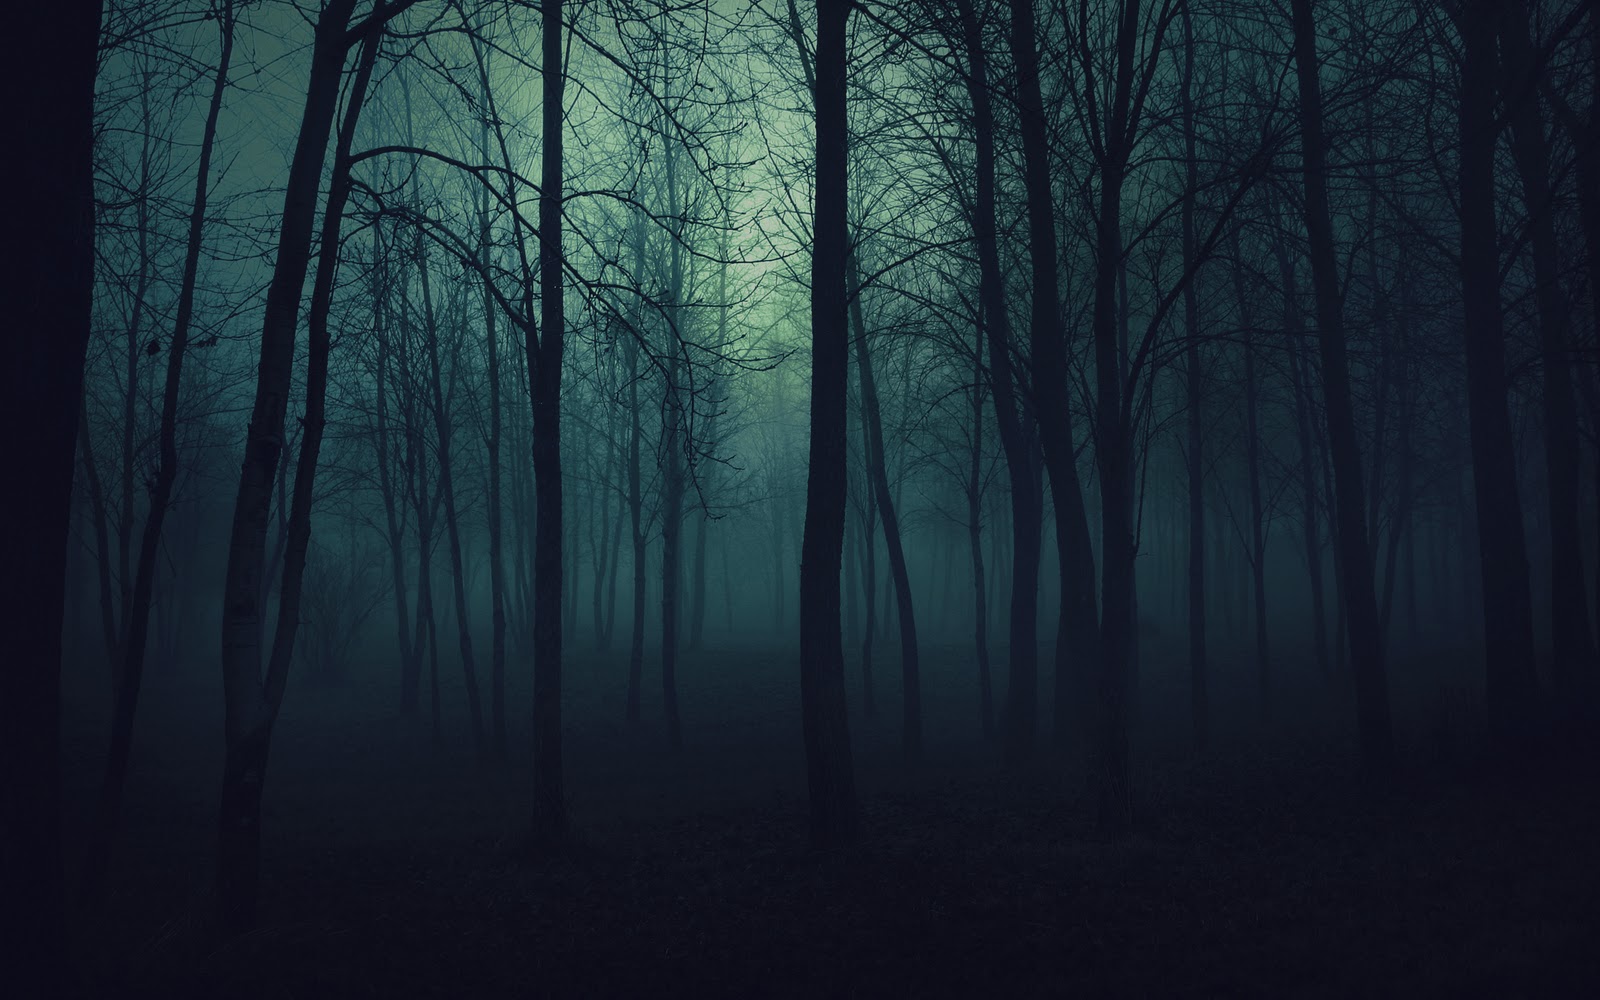  in a creepy night autum in a forrest 2012 download wallpapers 1600x1000